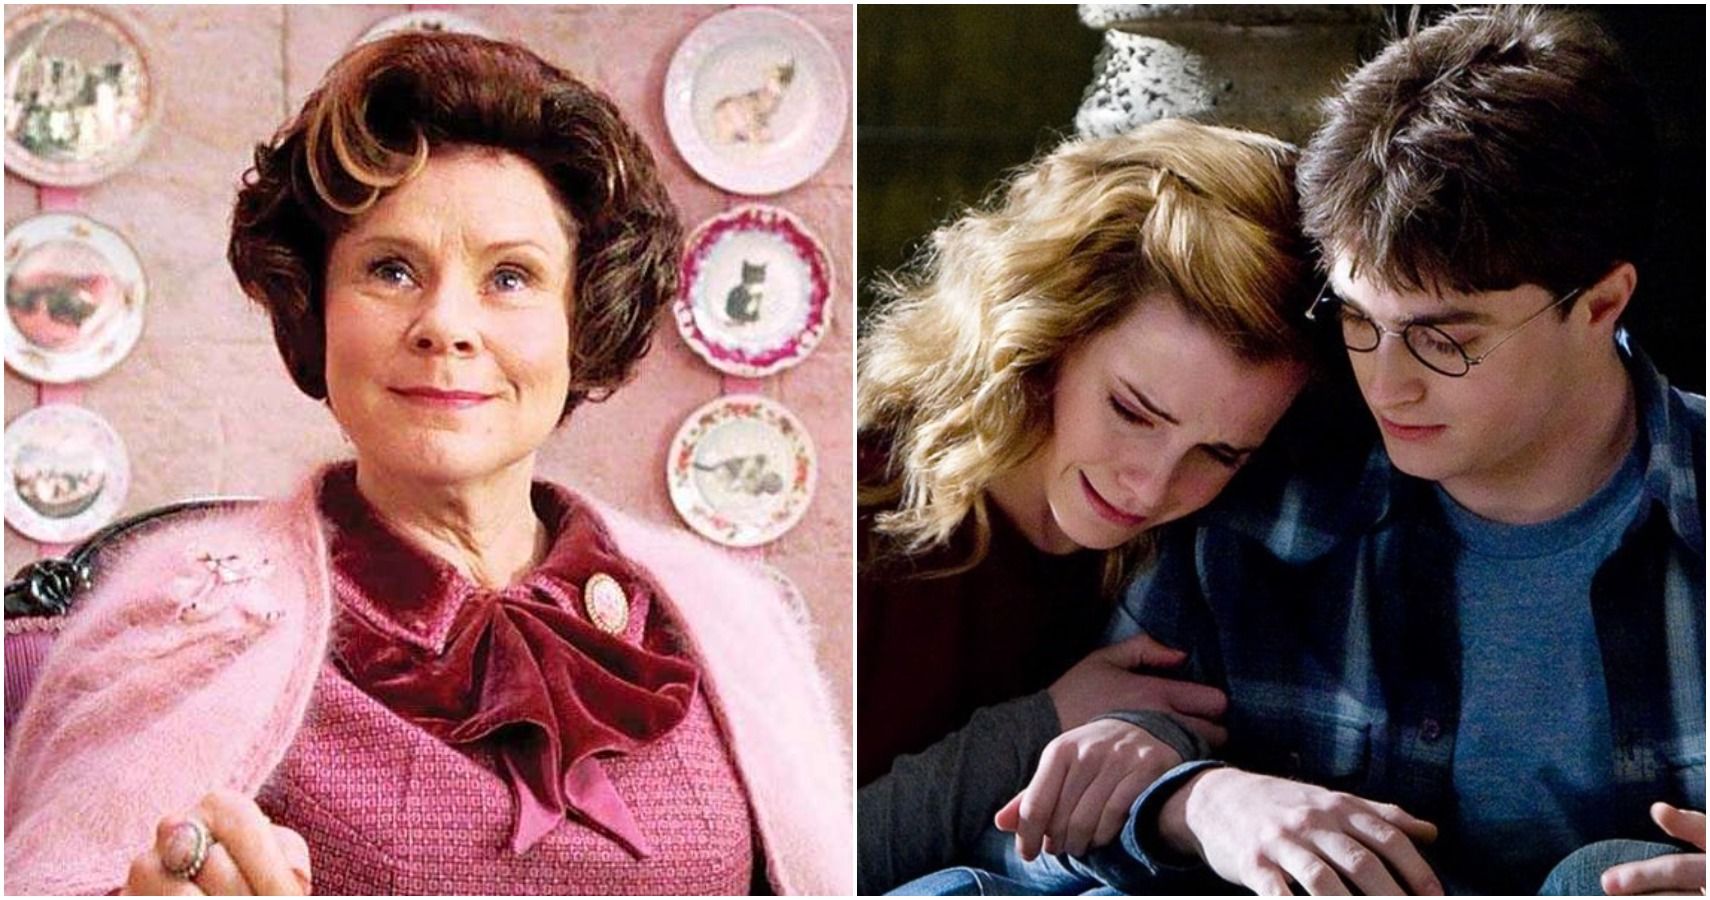 Harry Potter and the Order of the Phoenix (Umbridge), Harry Potter and the Half Blood Prince (Hermione and Harry)